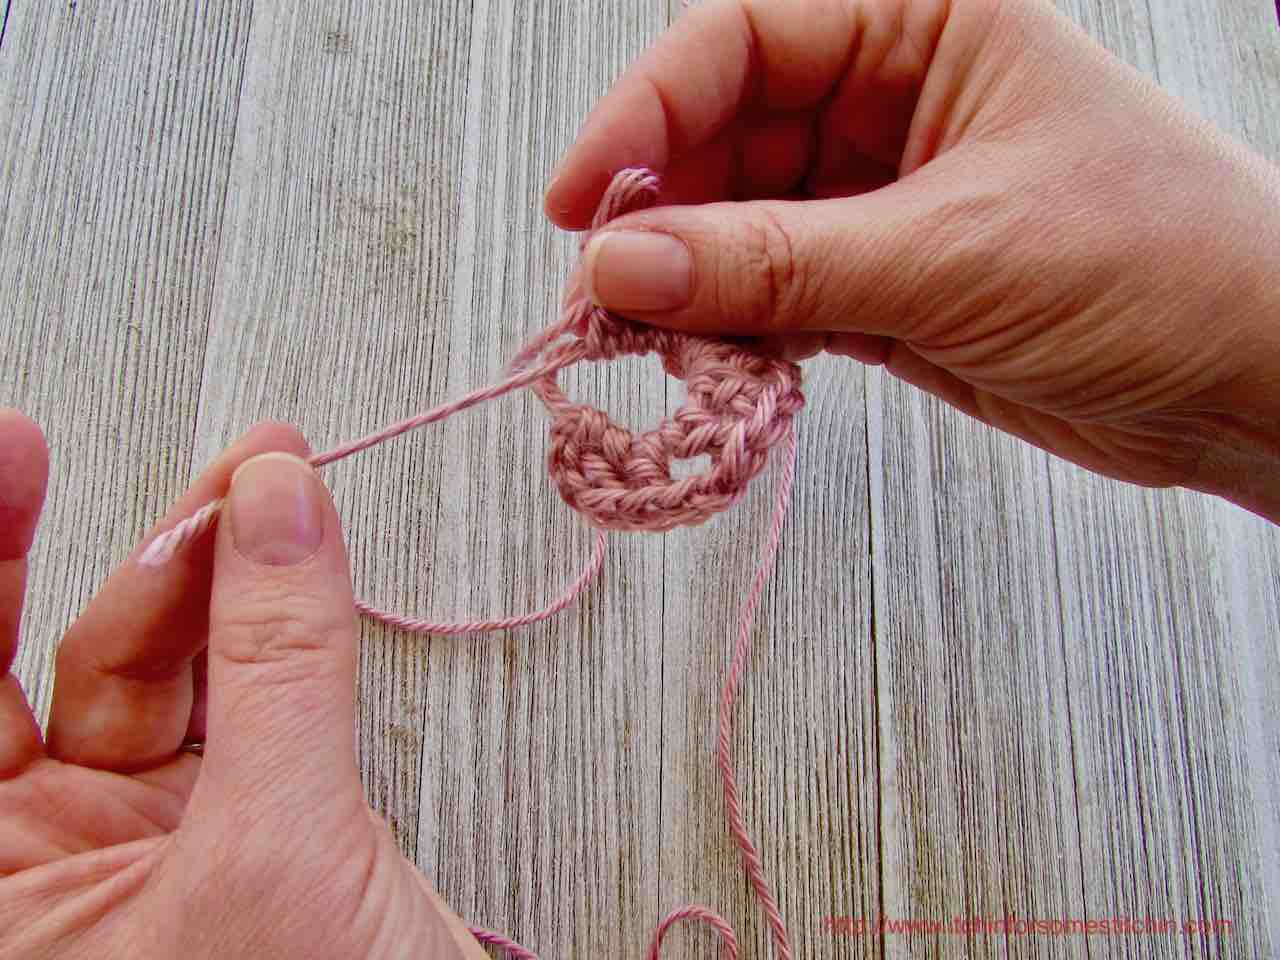 Closing the hole in the Granny Square by http://www.itchinforsomestitchin.com